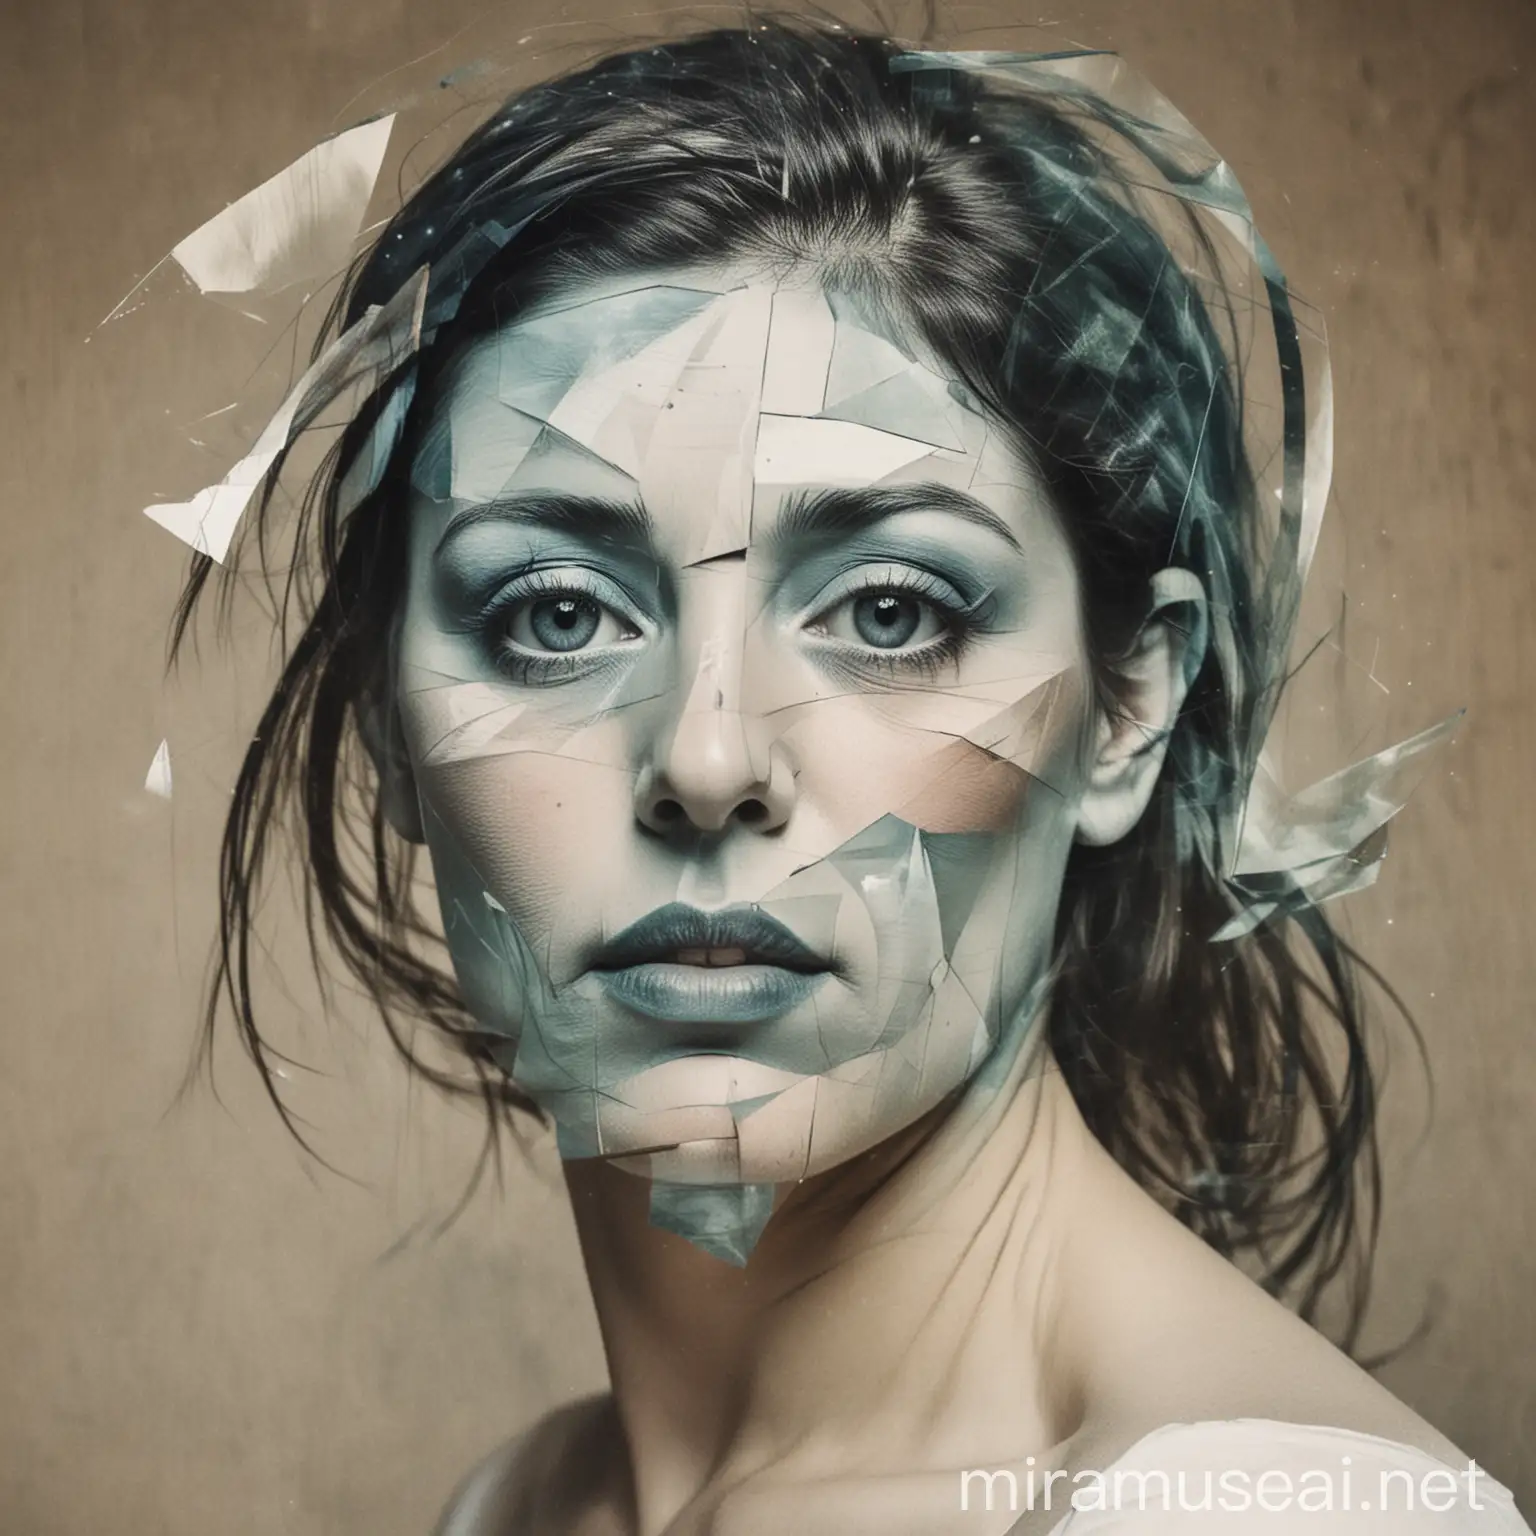 ‌double exposure of apainting woman inspired by picasso and an astrophotografy photo.